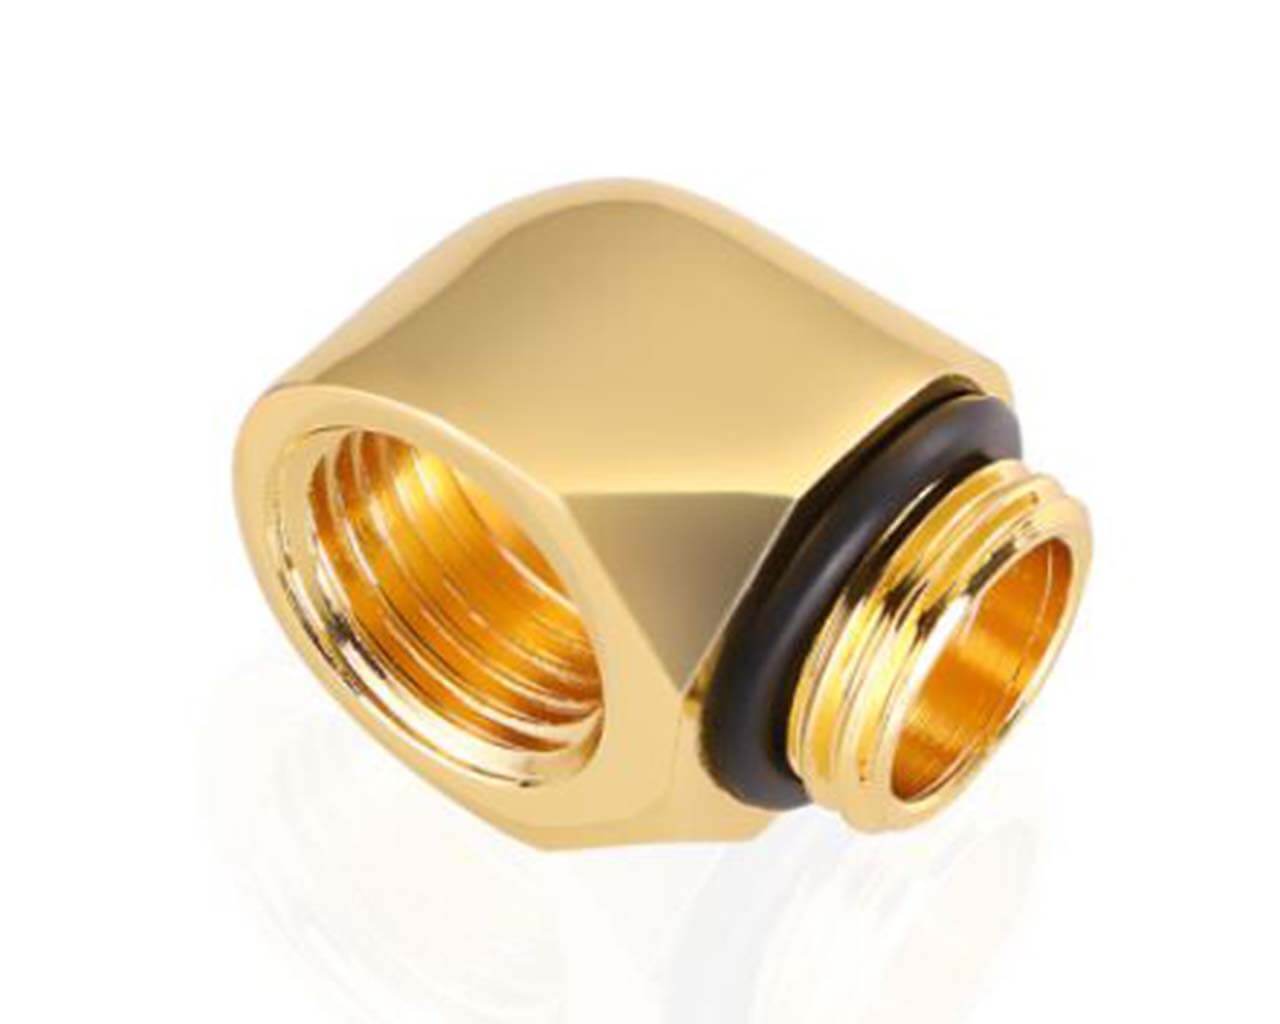 Bykski G1/4 Male to Female 90 Degree Elbow Fitting (B-D90) - PrimoChill - KEEPING IT COOL Gold